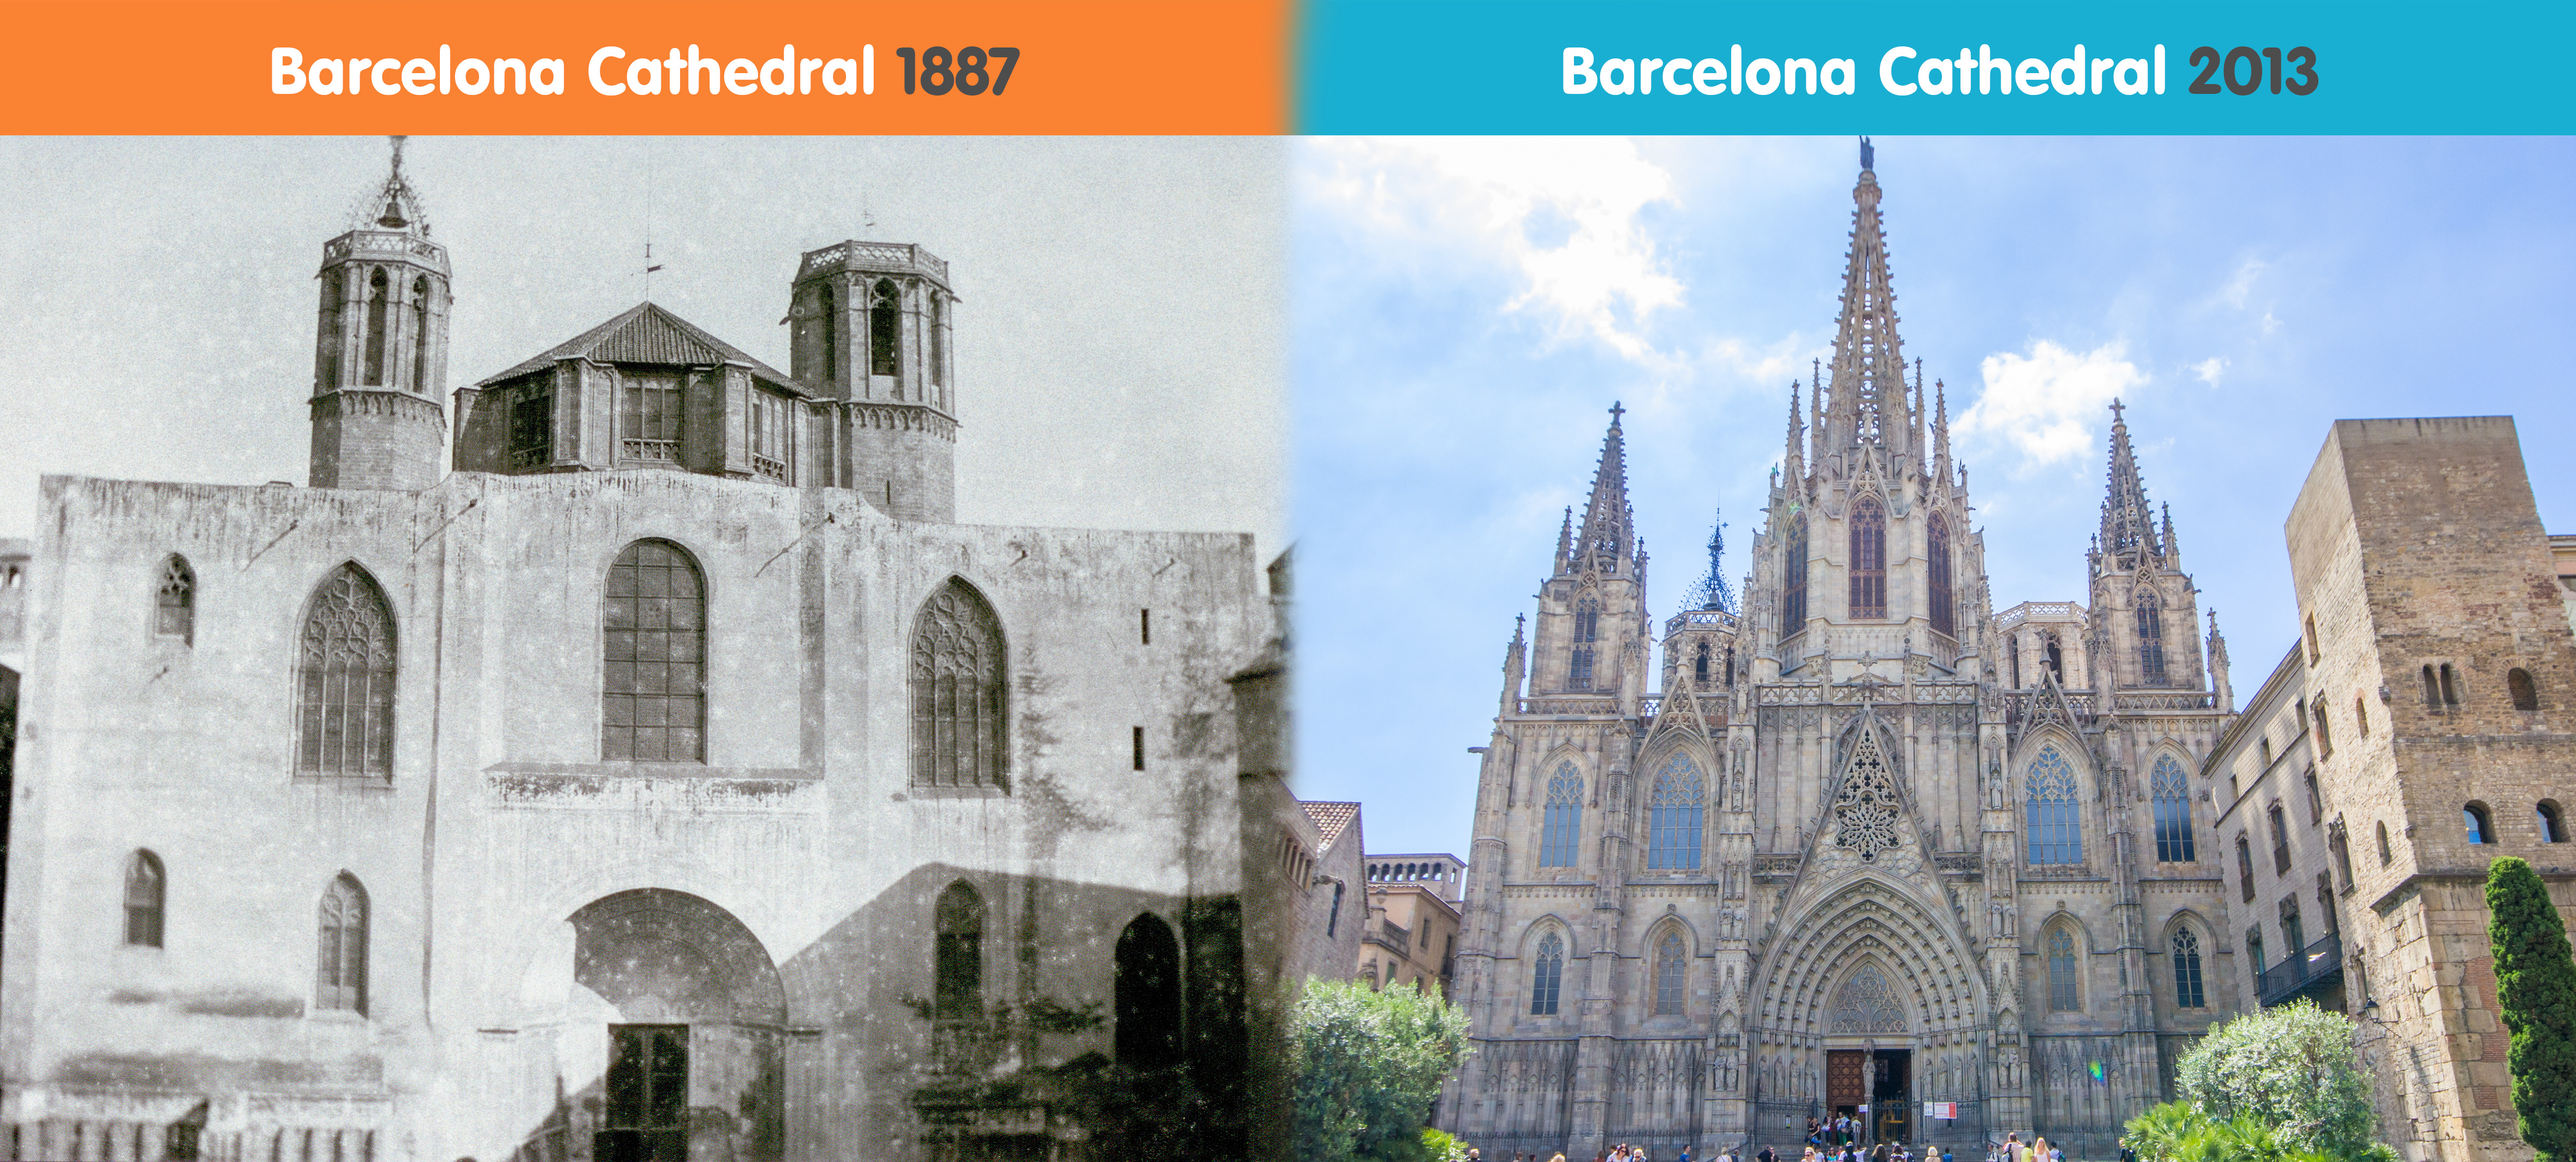 The Legendary History of Barcelona Cathedral